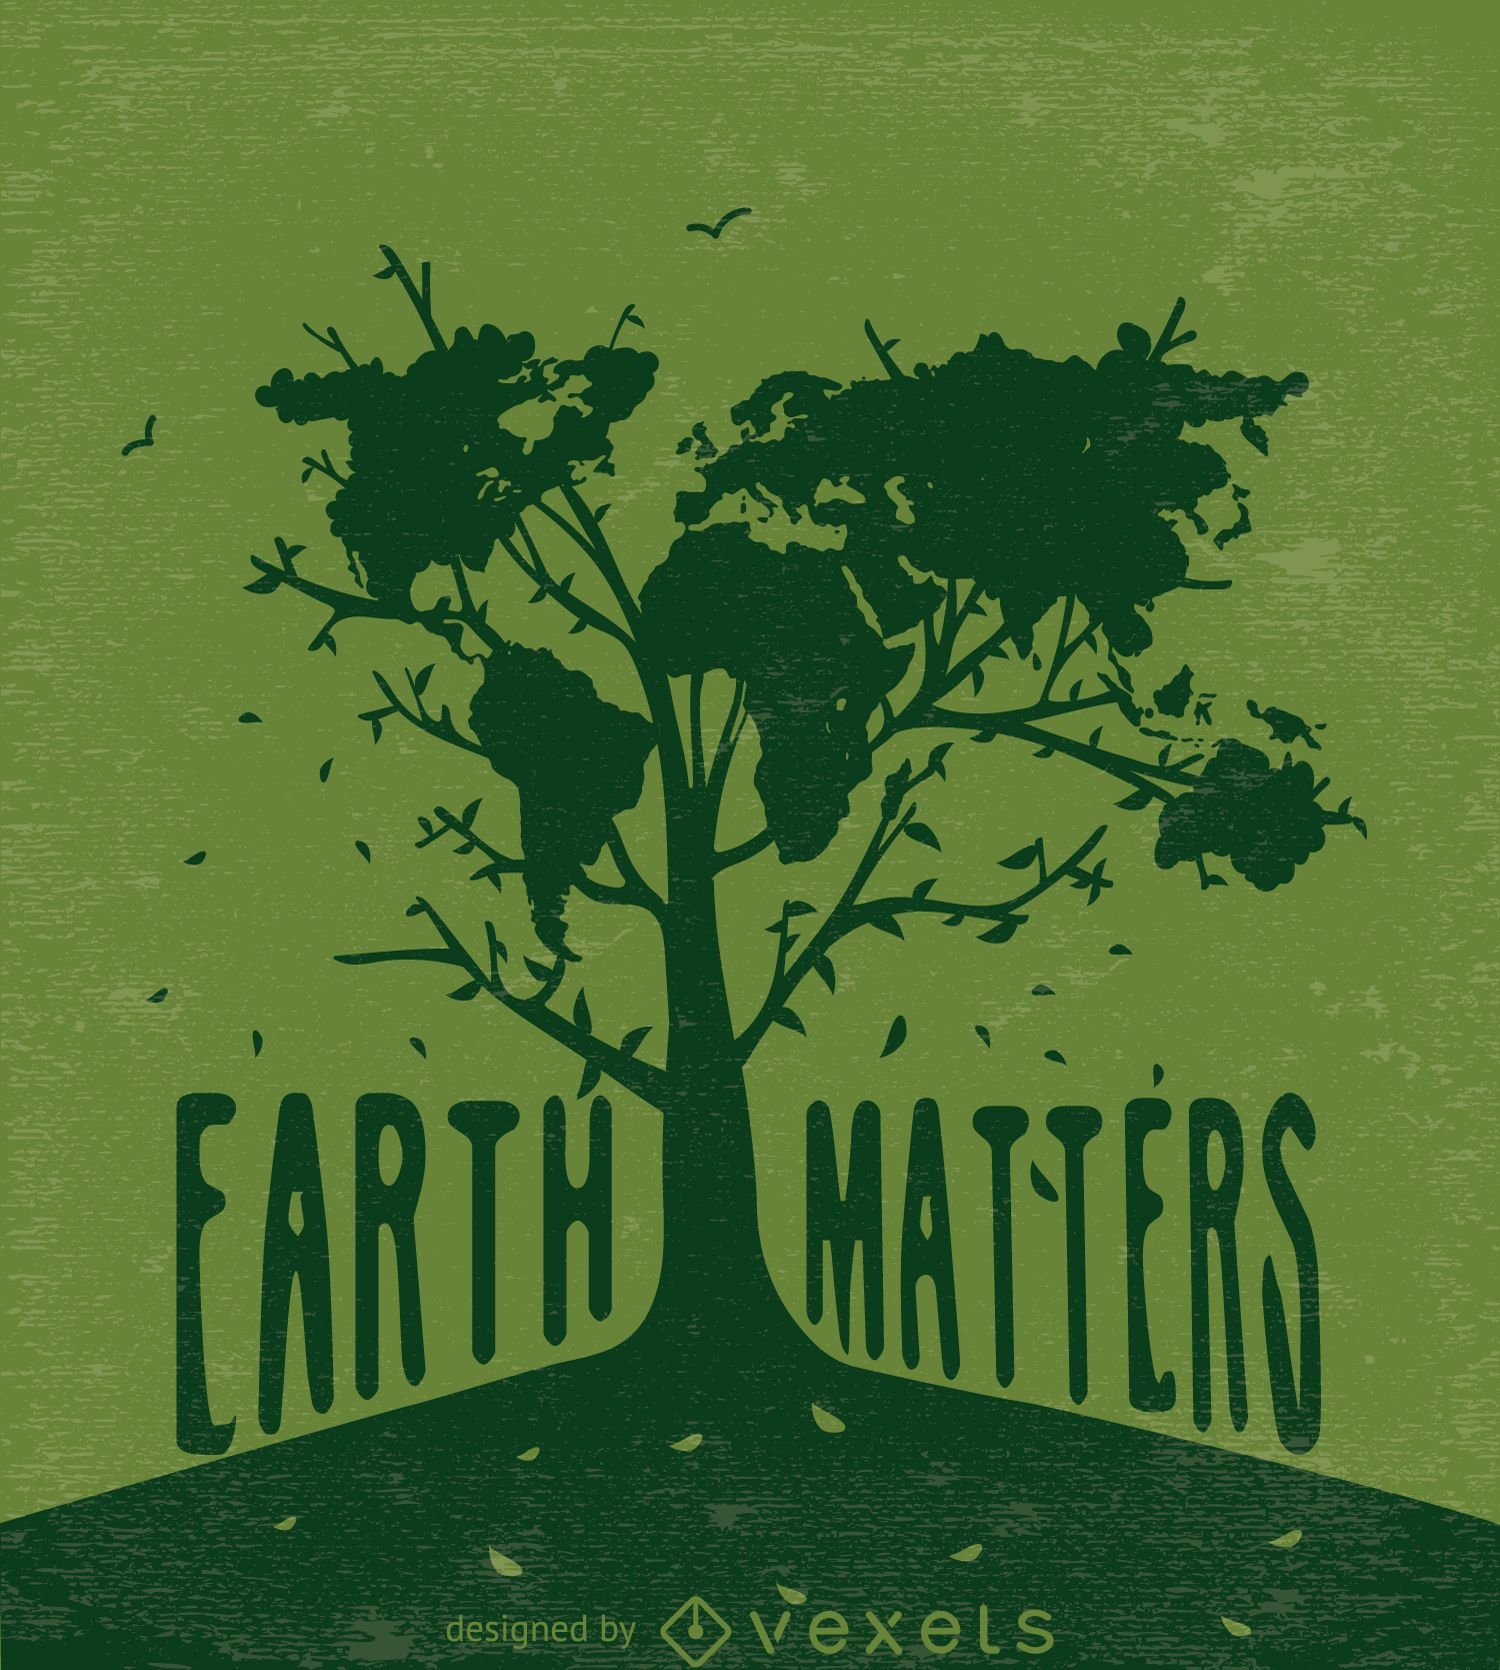 Earth matters-Tree with world map in green